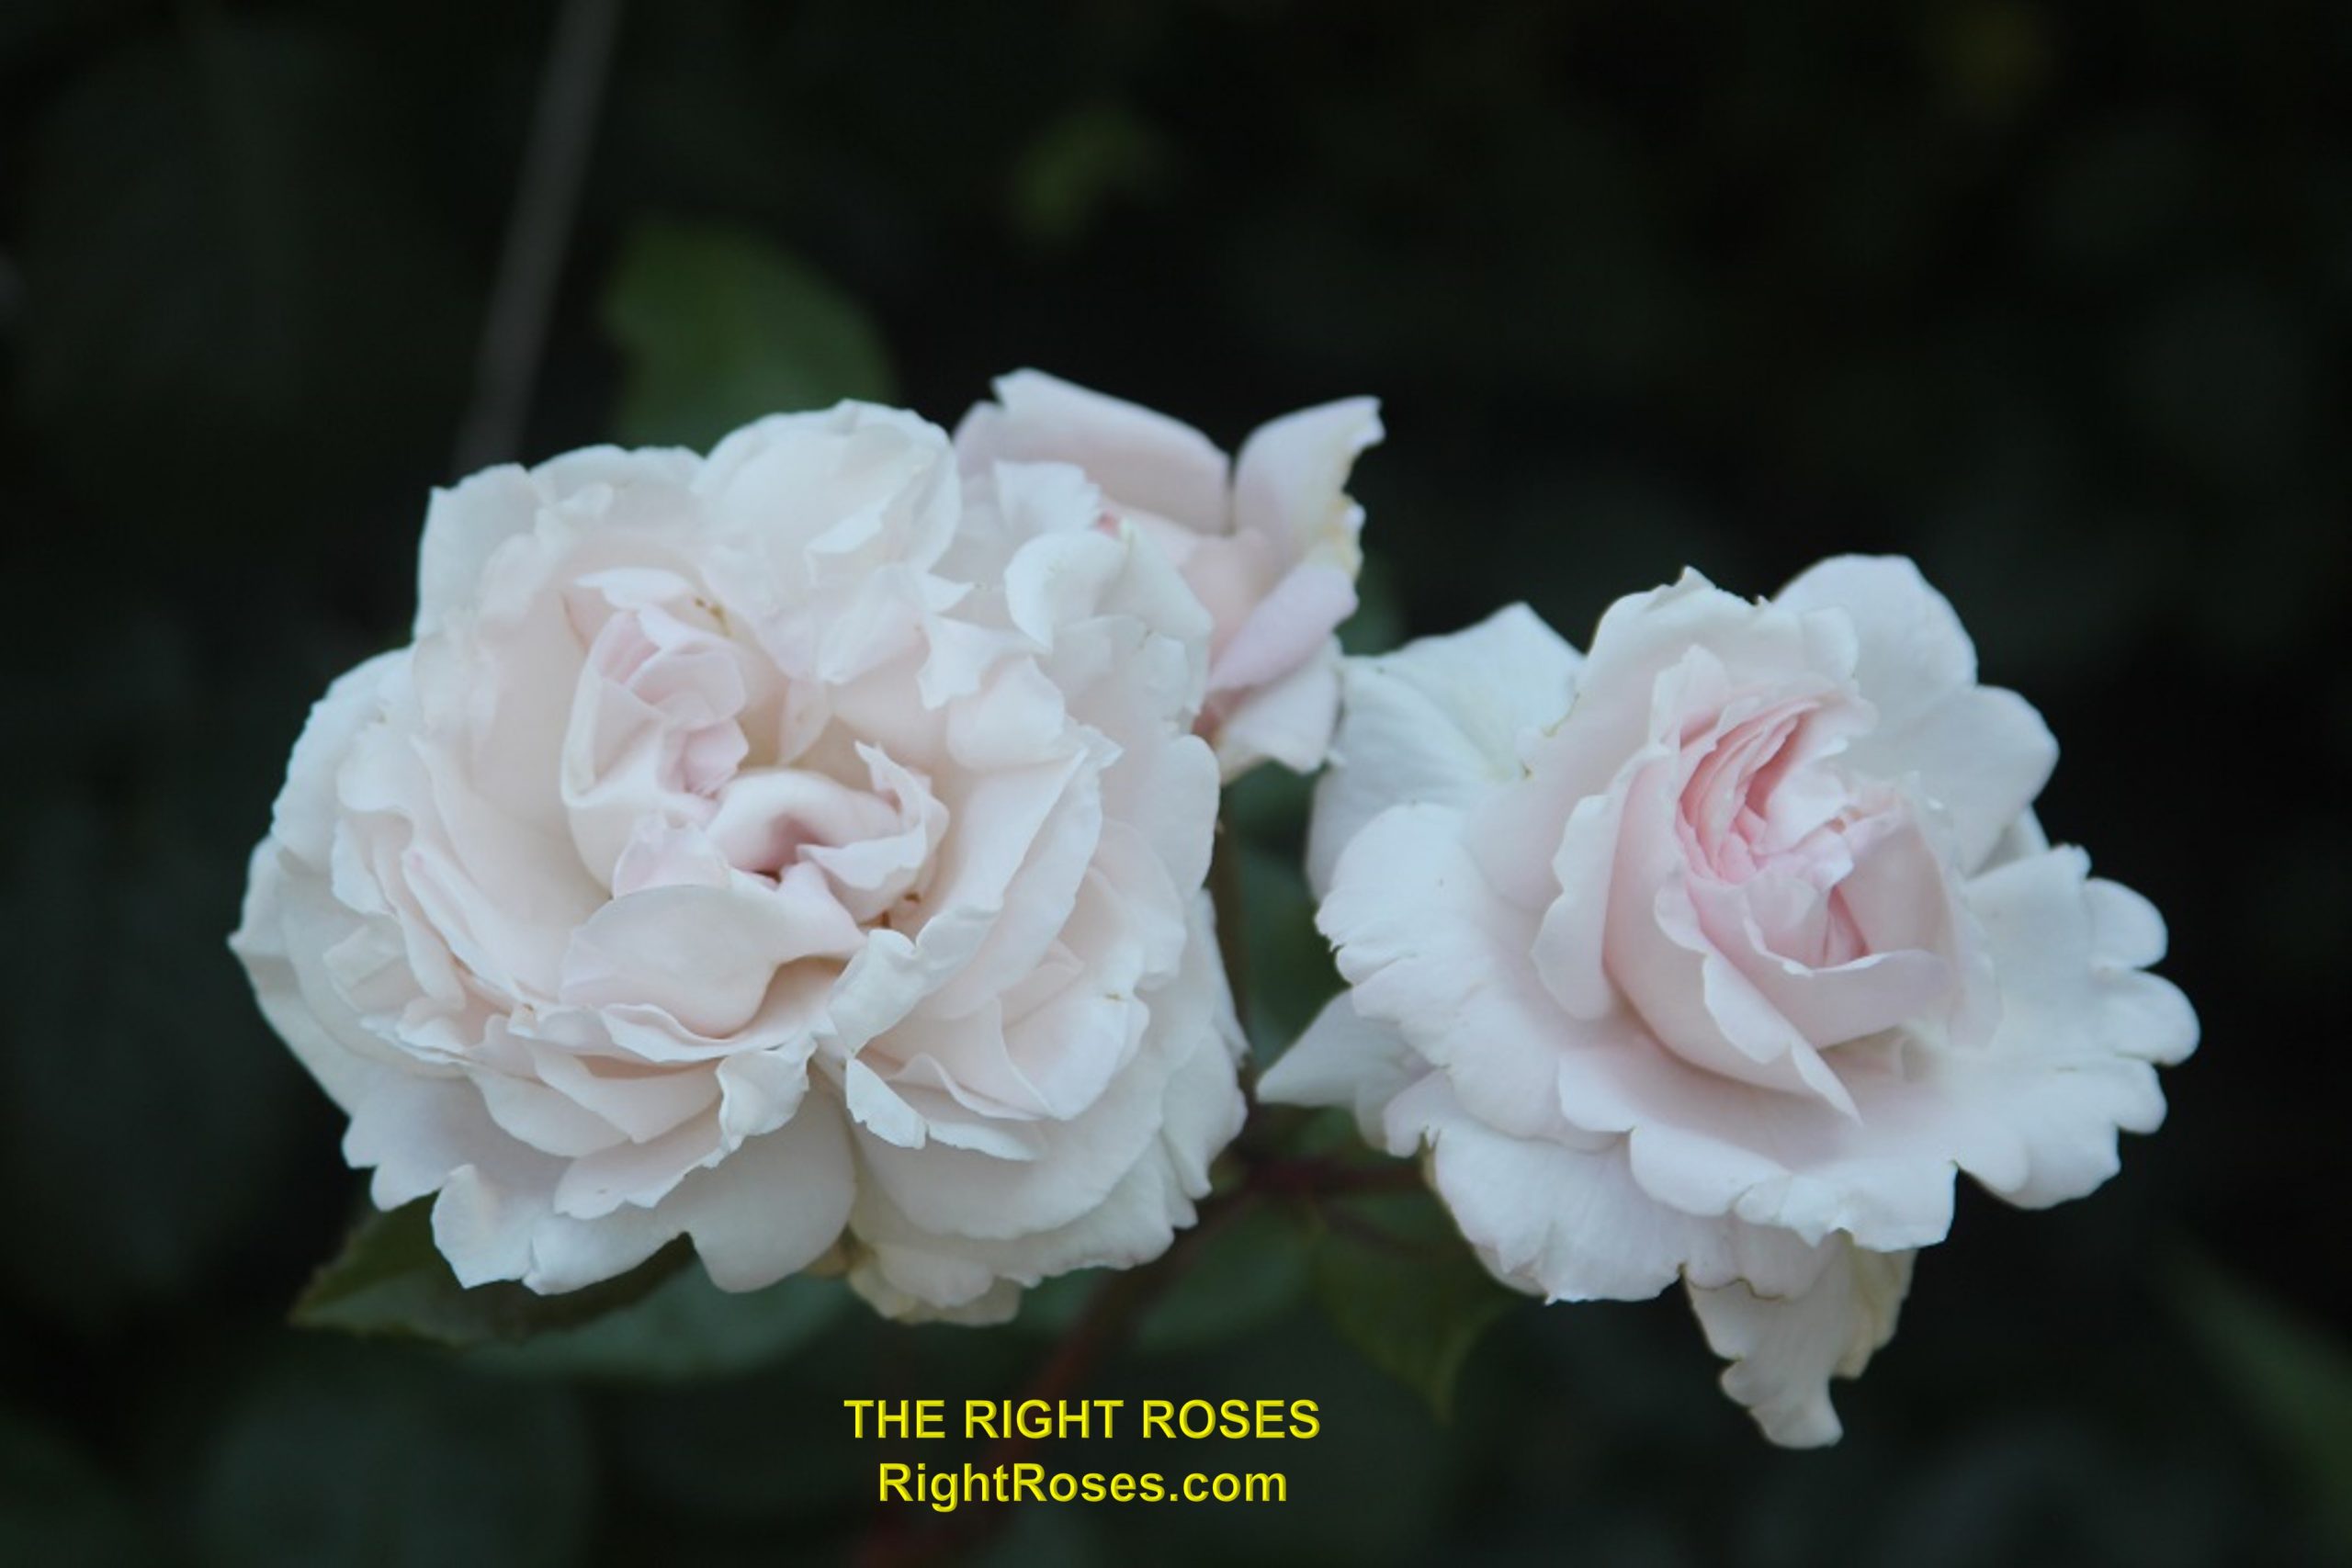 The Right Roses presents you with the best rose review of rose 'First Crush' (aka. Constanze Mozart, La Belle Ferronière, Pretty Parfuma) | Kordes Rosen 2012. Millions of gardeners from all over the world have trusted our in-depth reviews. The Right Roses team uses our own, bespoke The Right Roses Score, which is the most comprehensive rose rating system in the world, to assess the overall quality of a rose. We review all the very best roses from all the best rose breeders such as Rosen Kordes, Rosen Tantau, Delbard, David Austin Roses. The Right Roses is also running the best gardening club for the very best connoisseur gardeners and garden designers at Righttify.com. At Righttify.com, connoisseur sellers can design gardens, provide gardening services, and provide garden consulting services.